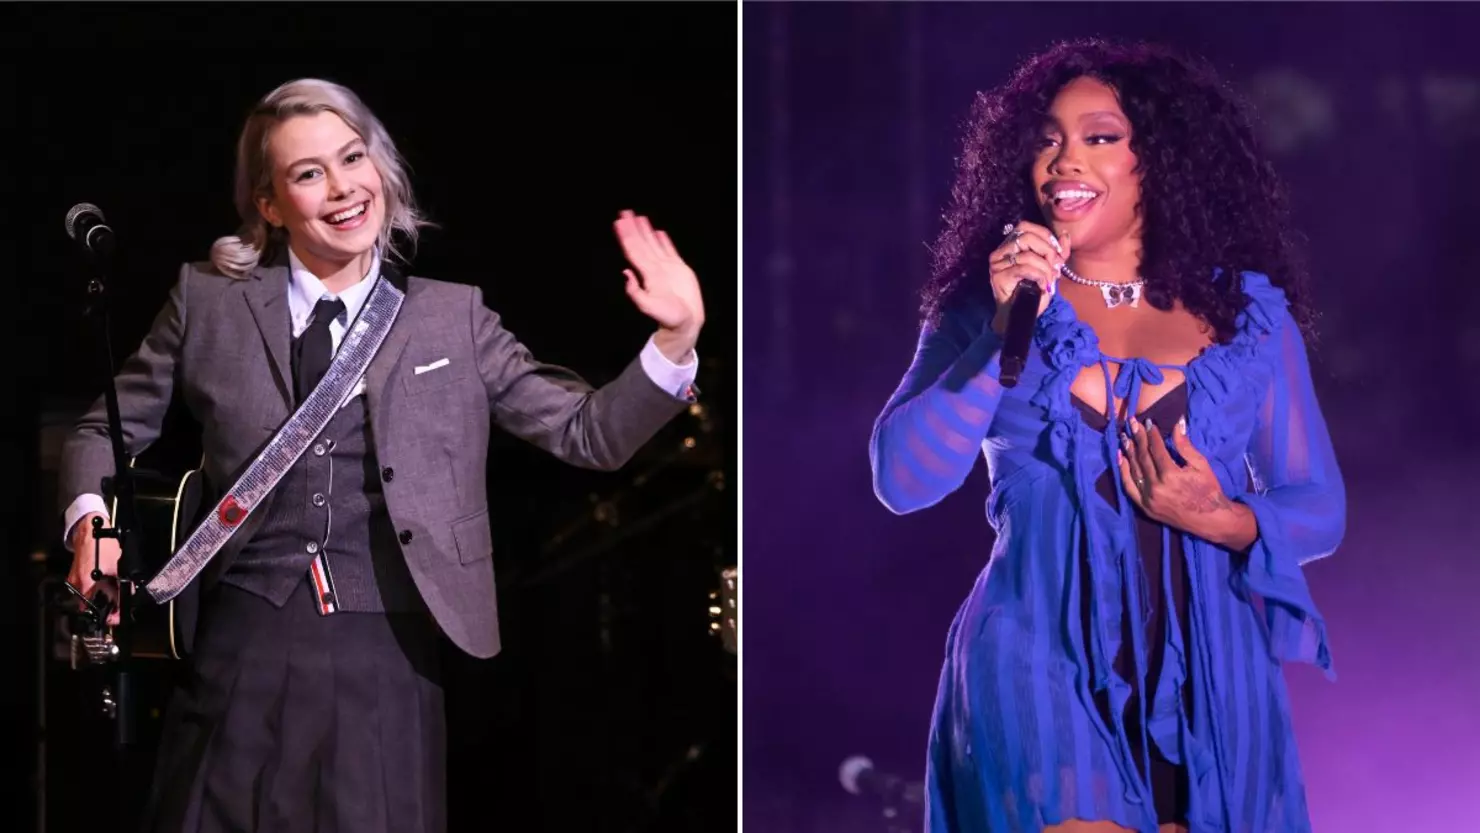 Two different images side-by-side. On the left is Phoebe Bridgers clad in a 3 piece suit, a guitar hanging off her left side, and on the right stands SZA. She's wearing a flow-y, dark blue dress and singing into a mic, illuminated by the purple light behind her. 